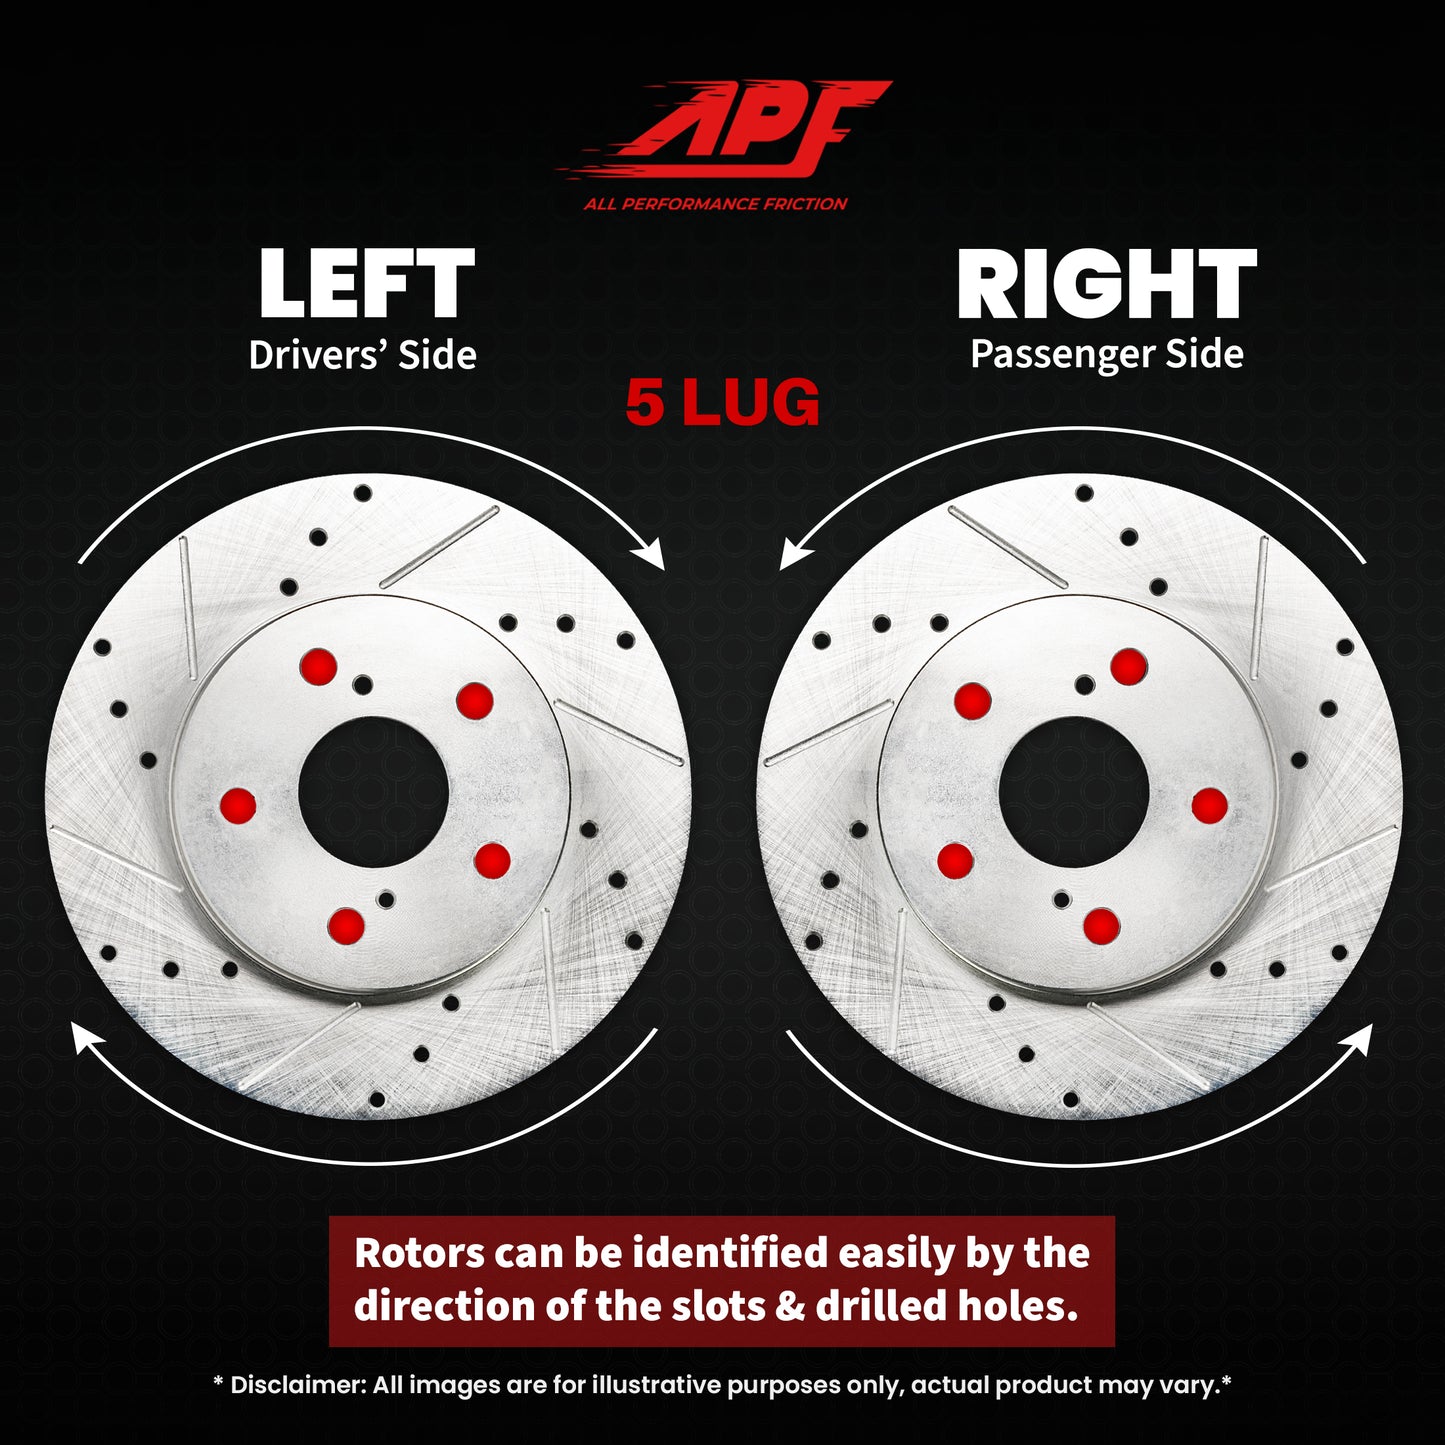 APF All Performance Friction Front Rotors compatible with Honda Element 2003-2011 Zinc Drilled Slotted Rotors | $123.15